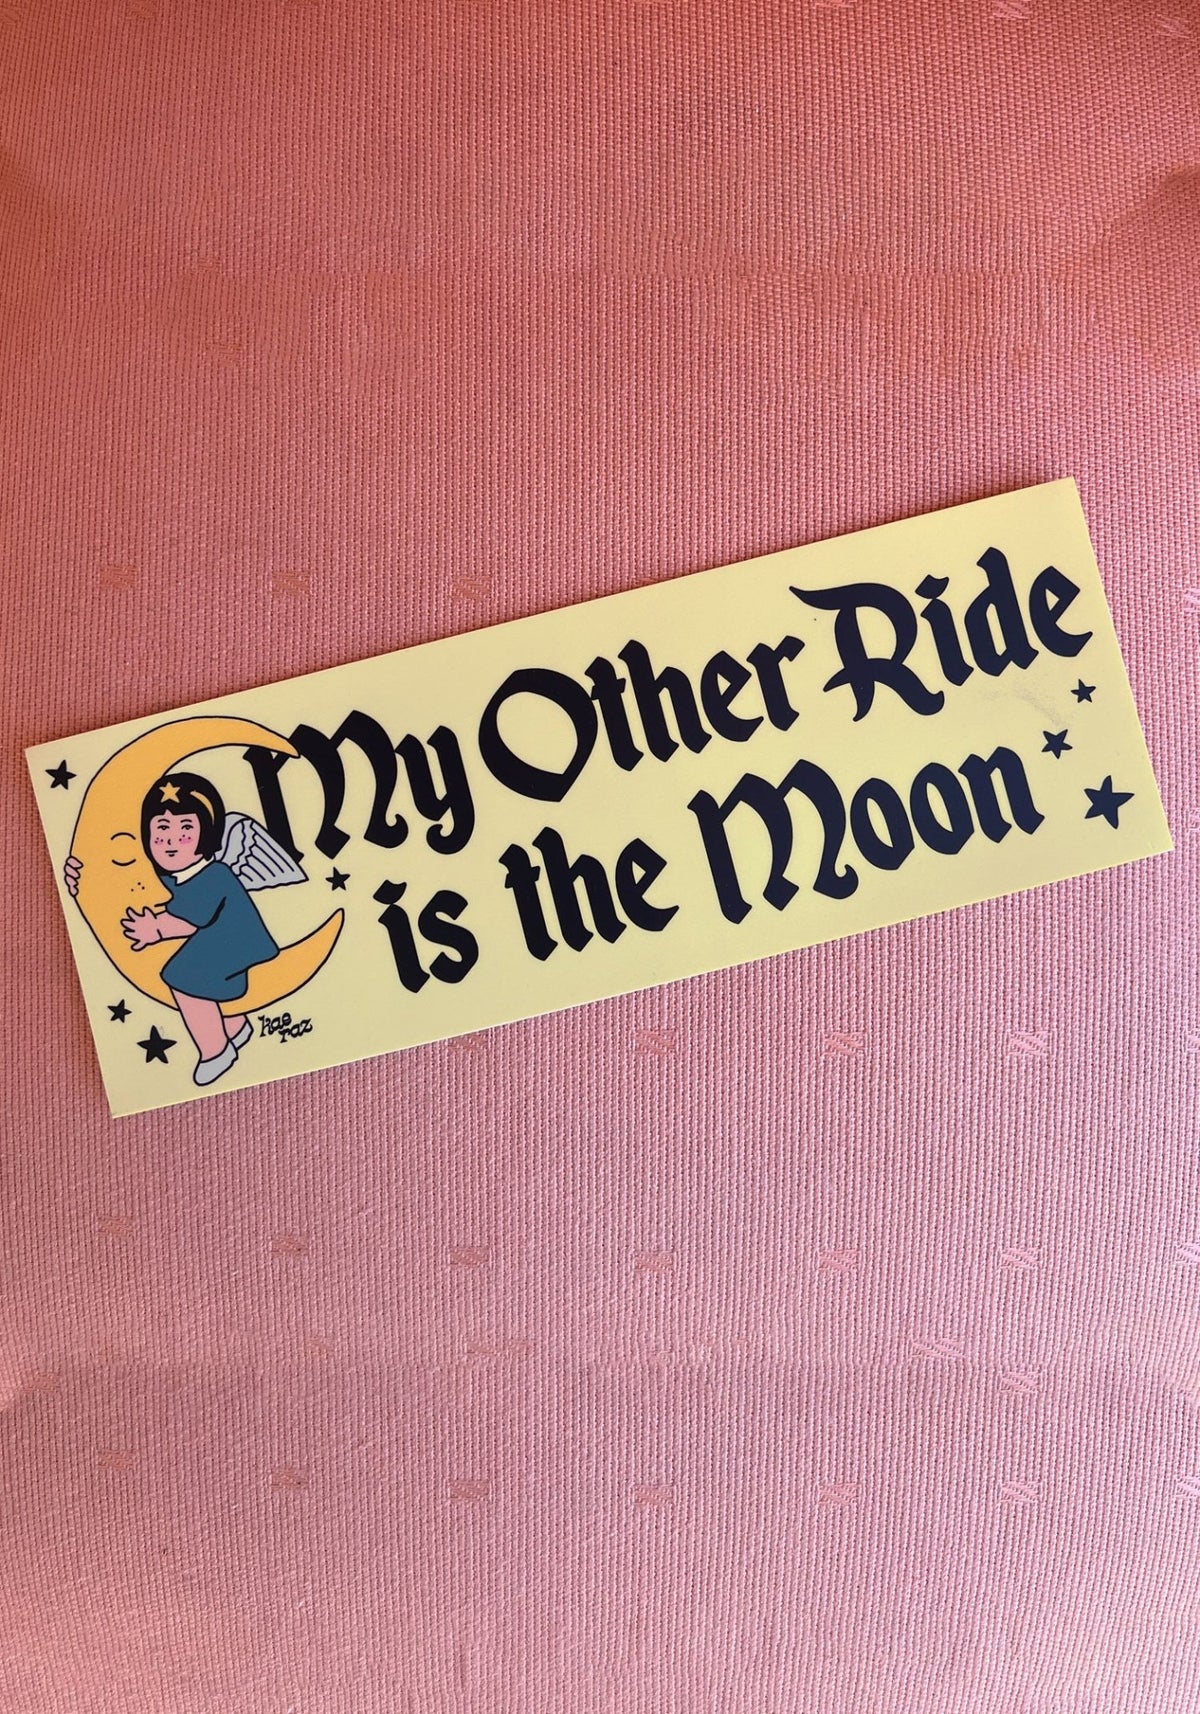 My Other Ride Is The Moon Bumper Sticker by kaeraz crescent moon moon moon and stars